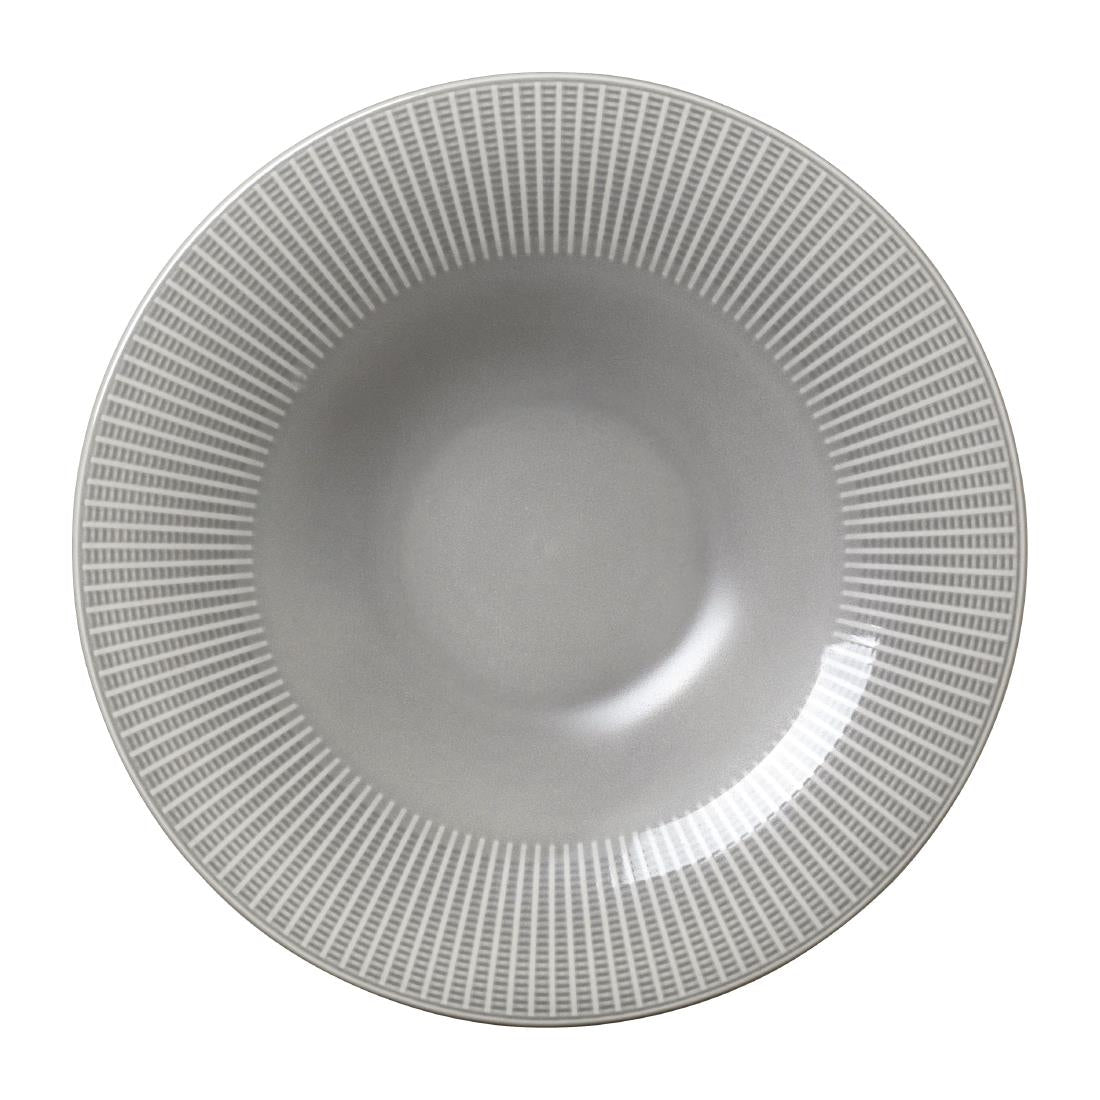 Steelite Willow Mist Gourmet Rimmed Coupe Bowls 285mm (Pack of 6)